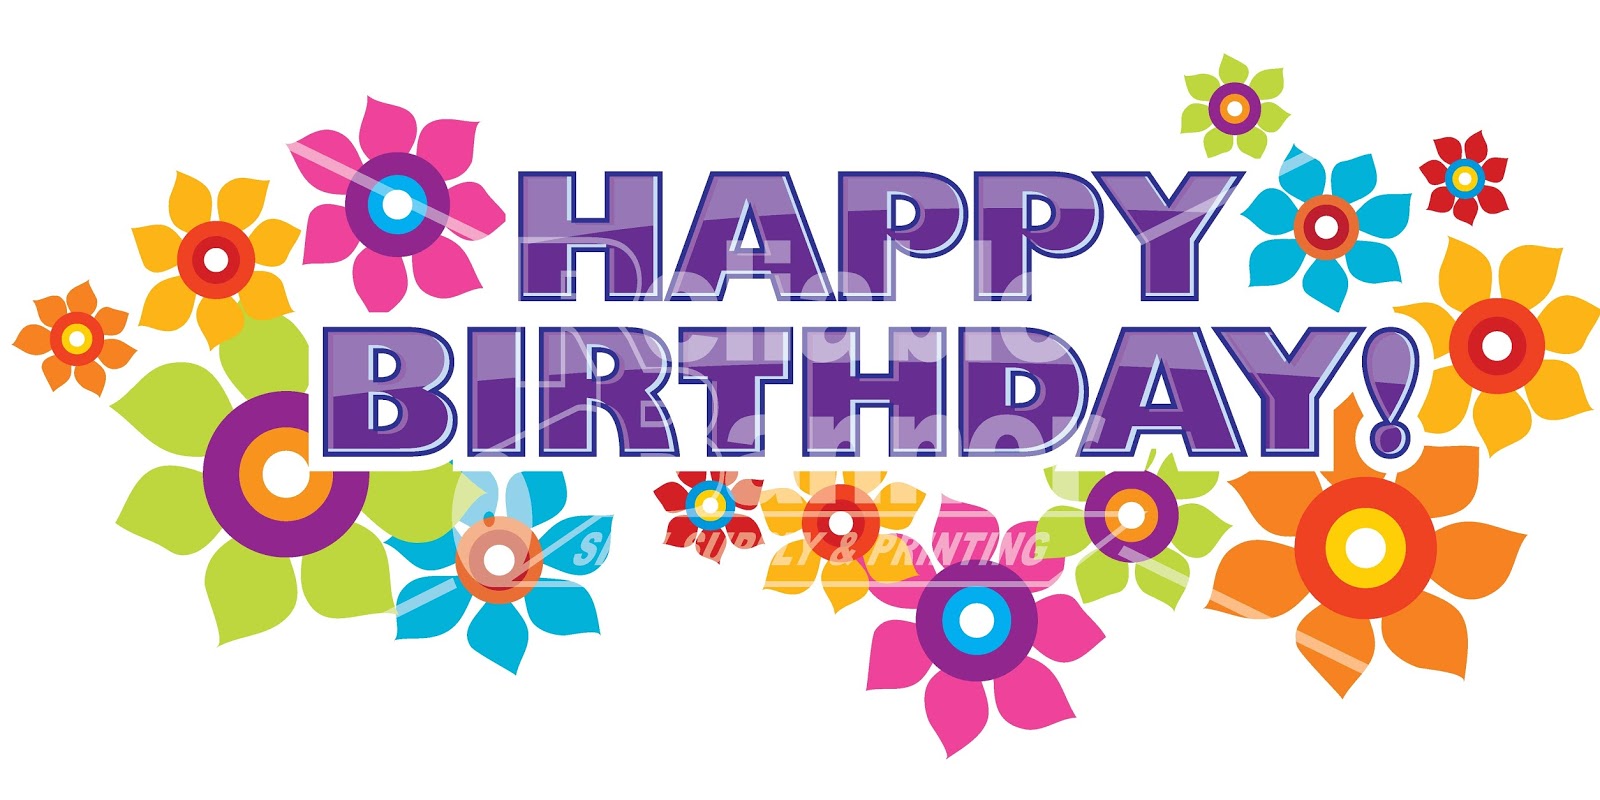 Free Printable Birthday Banners And Signs